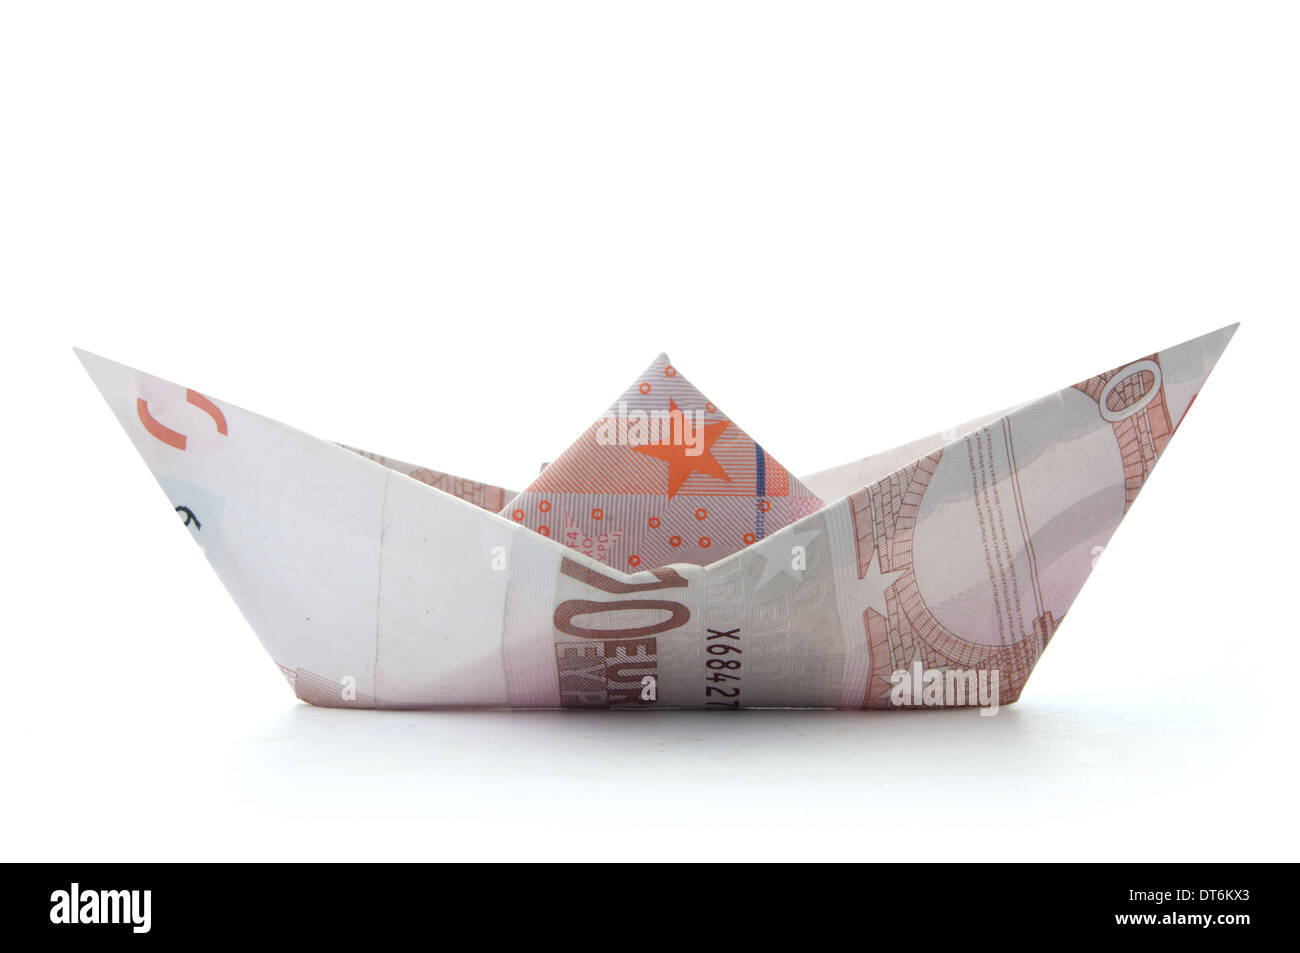 Euro banknote paper boat Stock Photo